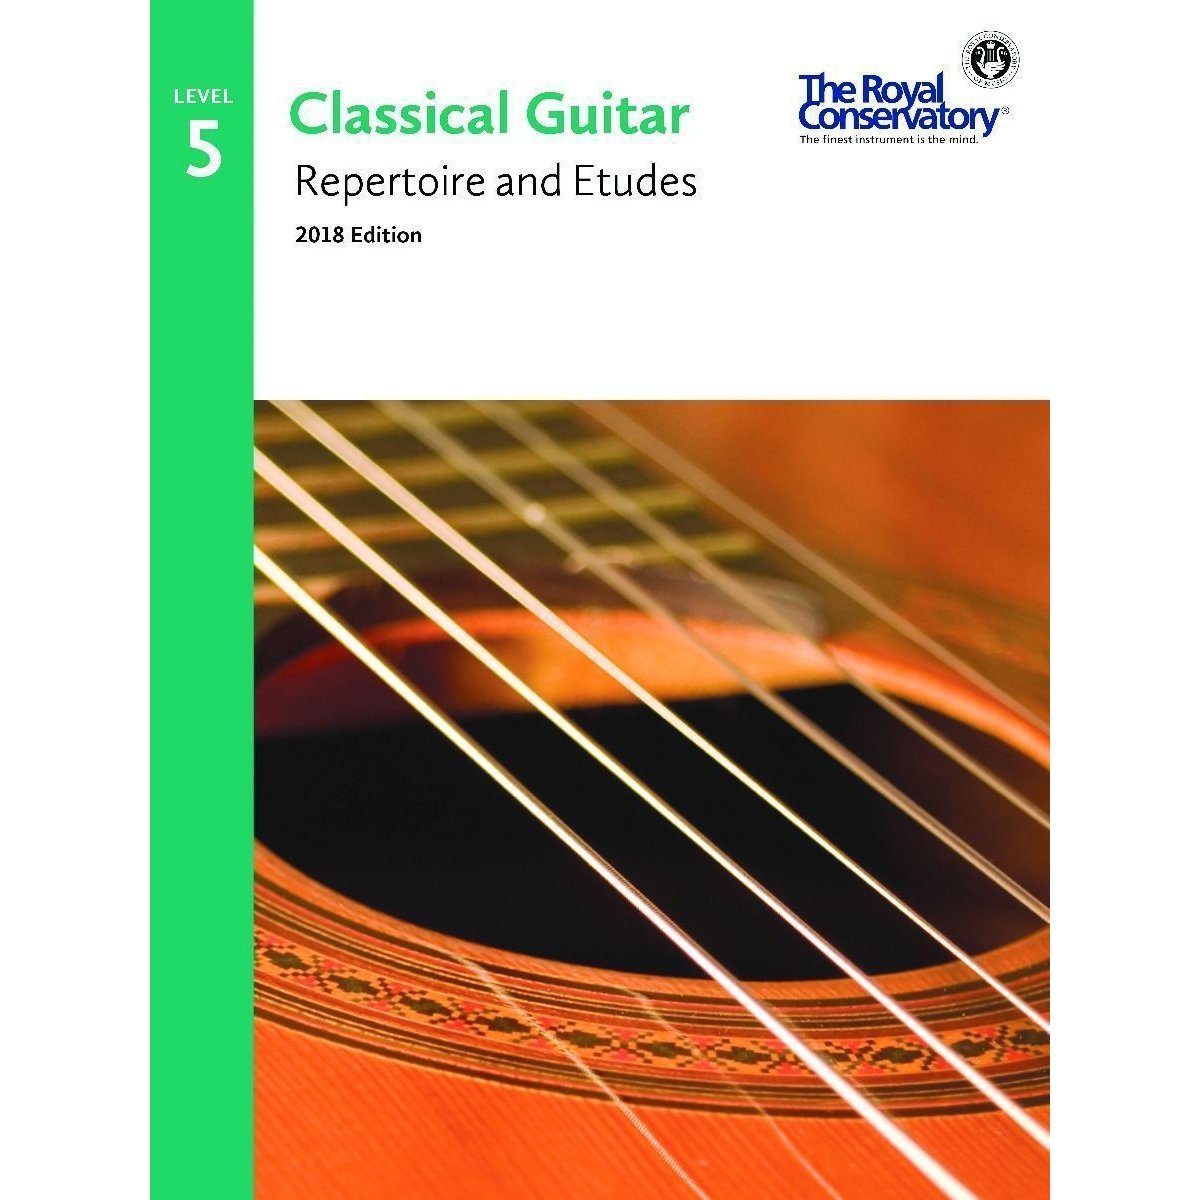 The Royal Conservatory Classical Guitar Repertoire and Etudes Level 5 2018 Edition-Music World Academy